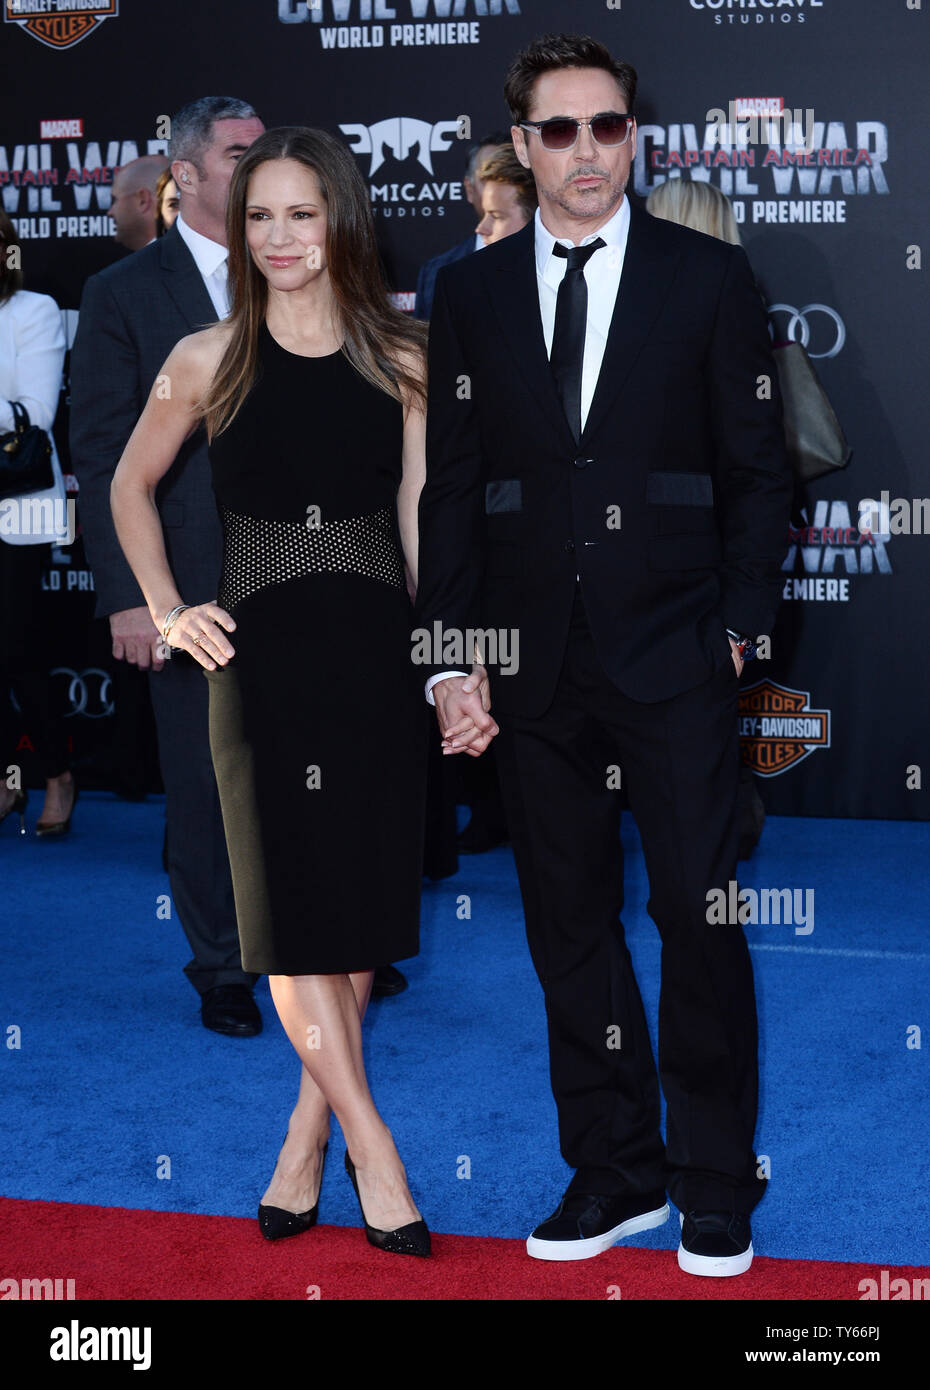 Cast member Robert Downey Jr. and his wife Susan Downey attend the premiere of the sci-fi motion picture fantasy 'Captain America: Civil War' at the El Capitan Theatre in the Hollywood section of Los Angeles on April 12, 2016. Storyline: Political interference in the Avengers' activities causes a rift between former allies Captain America and Iron Man.  Photo by Jim Ruymen/UPI Stock Photo